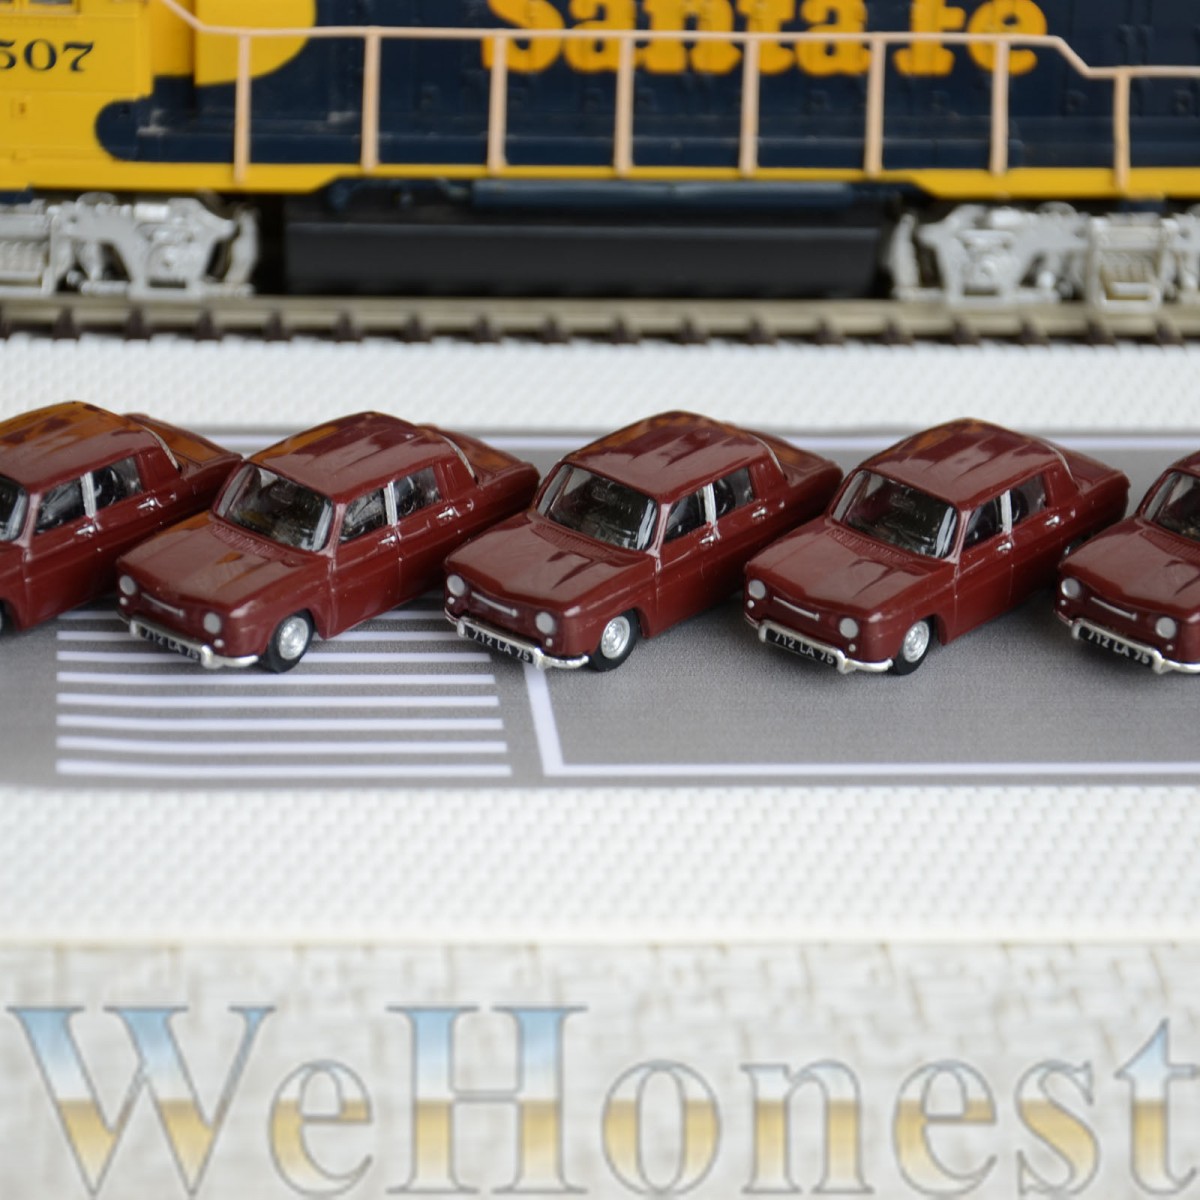 5 x Metal Model Cars 1:87 HO Scale for Building Railroad Train Scenery Brown